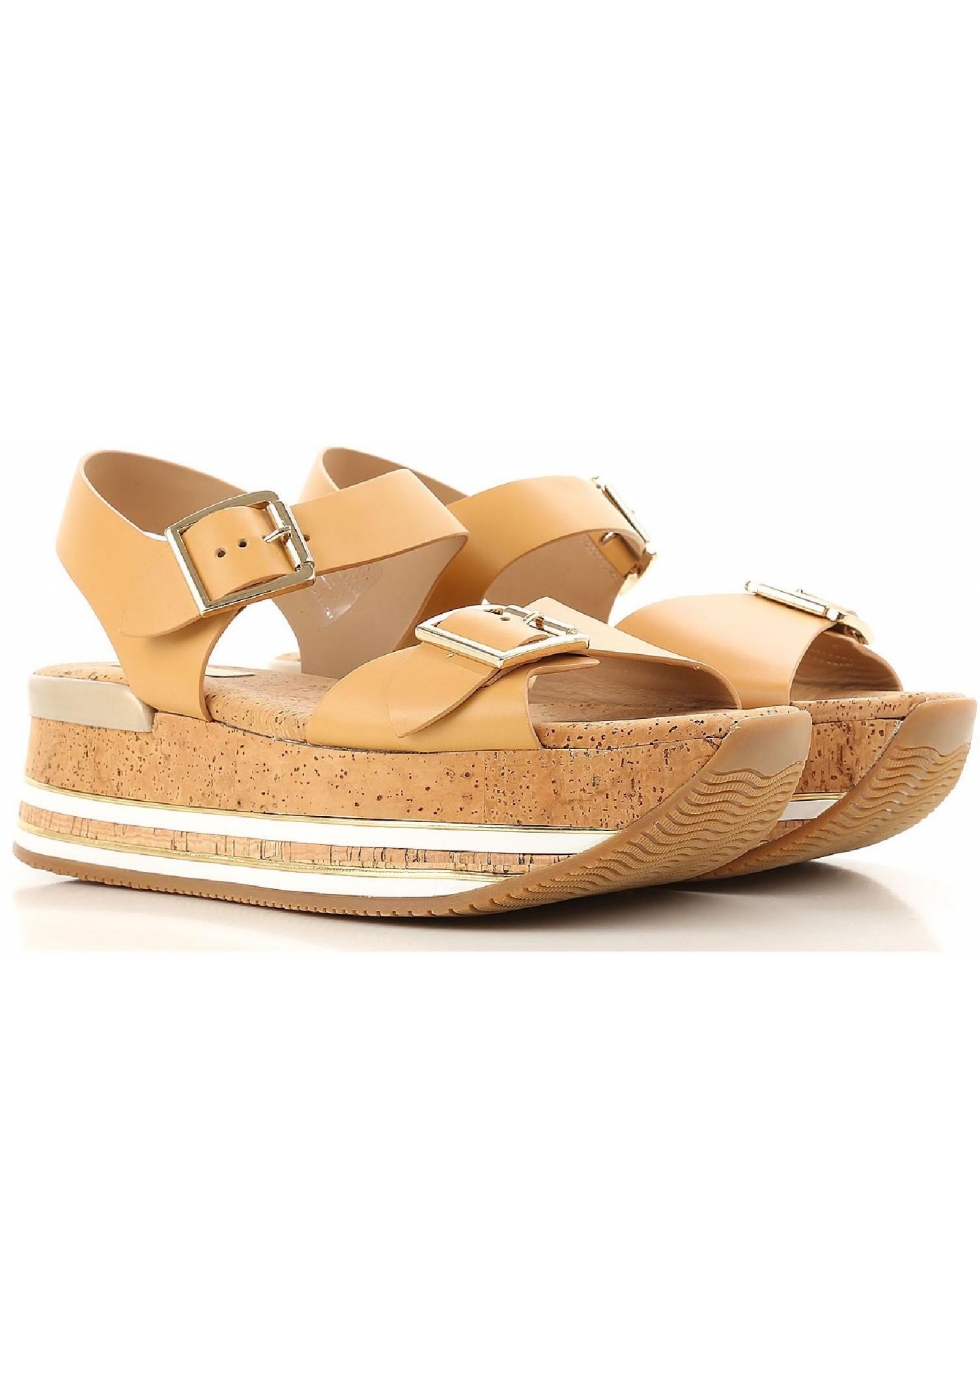 Hogan flat wedges sandals in tan leather - Italian Boutique